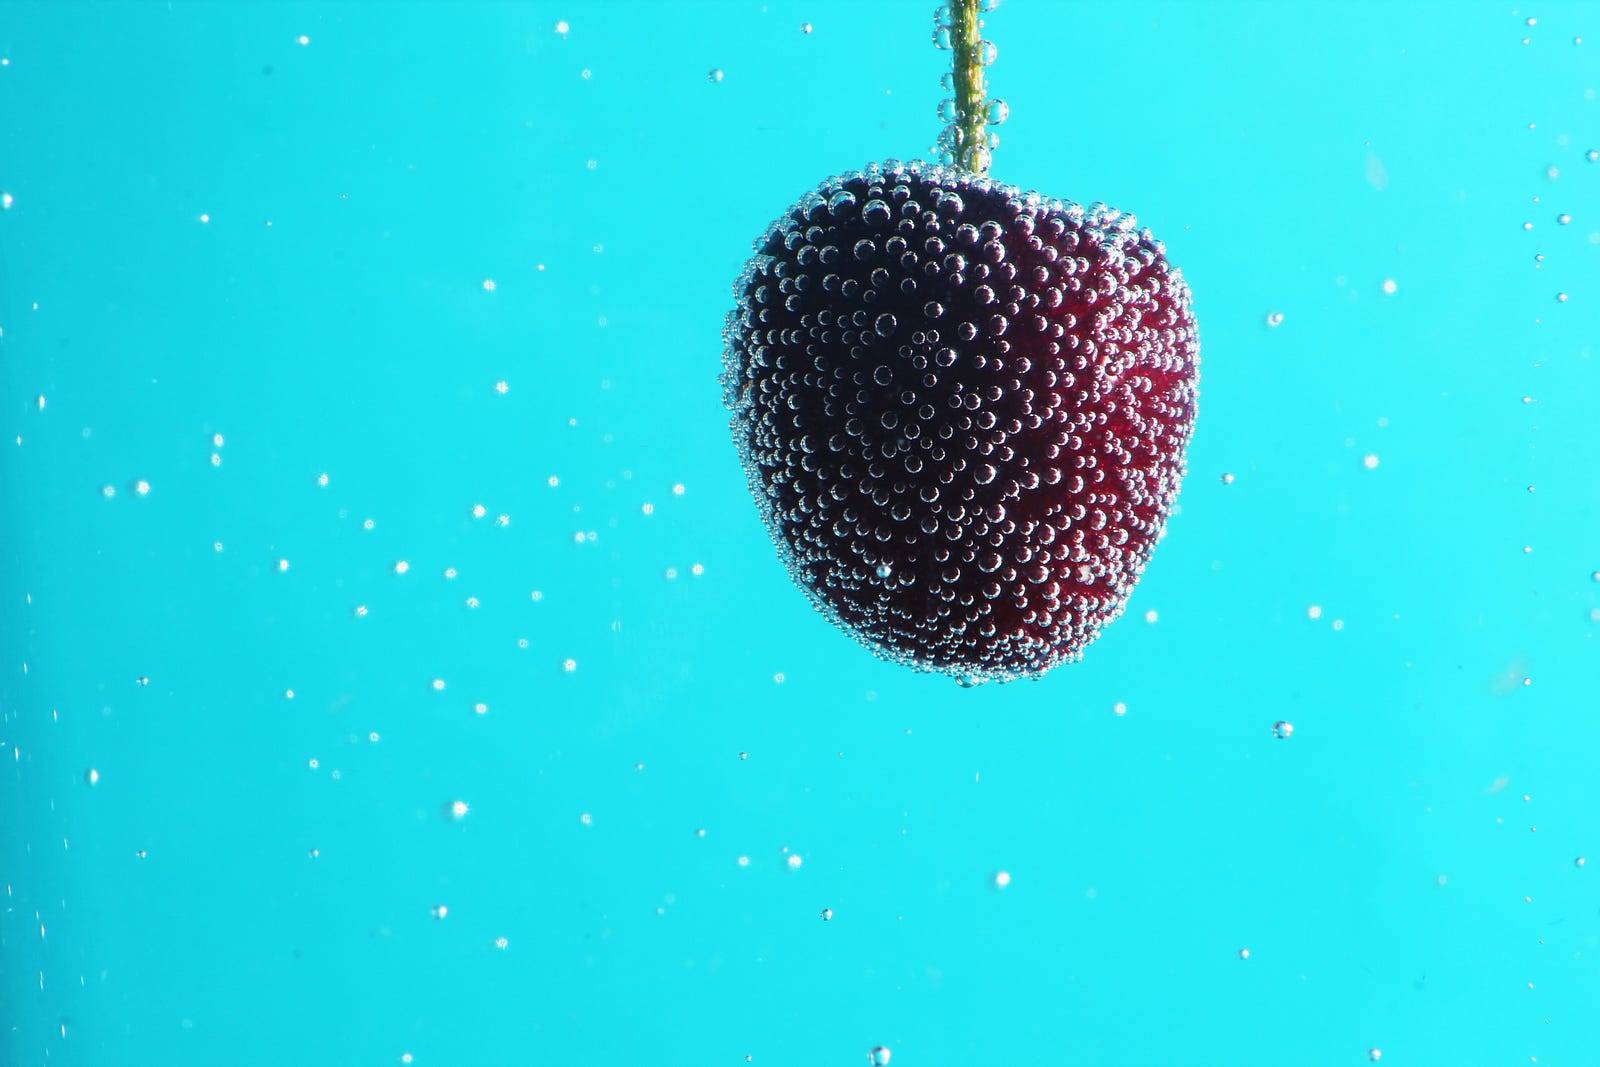 A cherry floats in sparkling water, with a powder blue background. In conclusion, sparkling water offers several potential health benefits that can make it an appealing choice for those looking to maintain or improve their well-being. It can contribute to hydration, aid digestion for some individuals, and be a tooth-friendly alternative to sugary beverages.